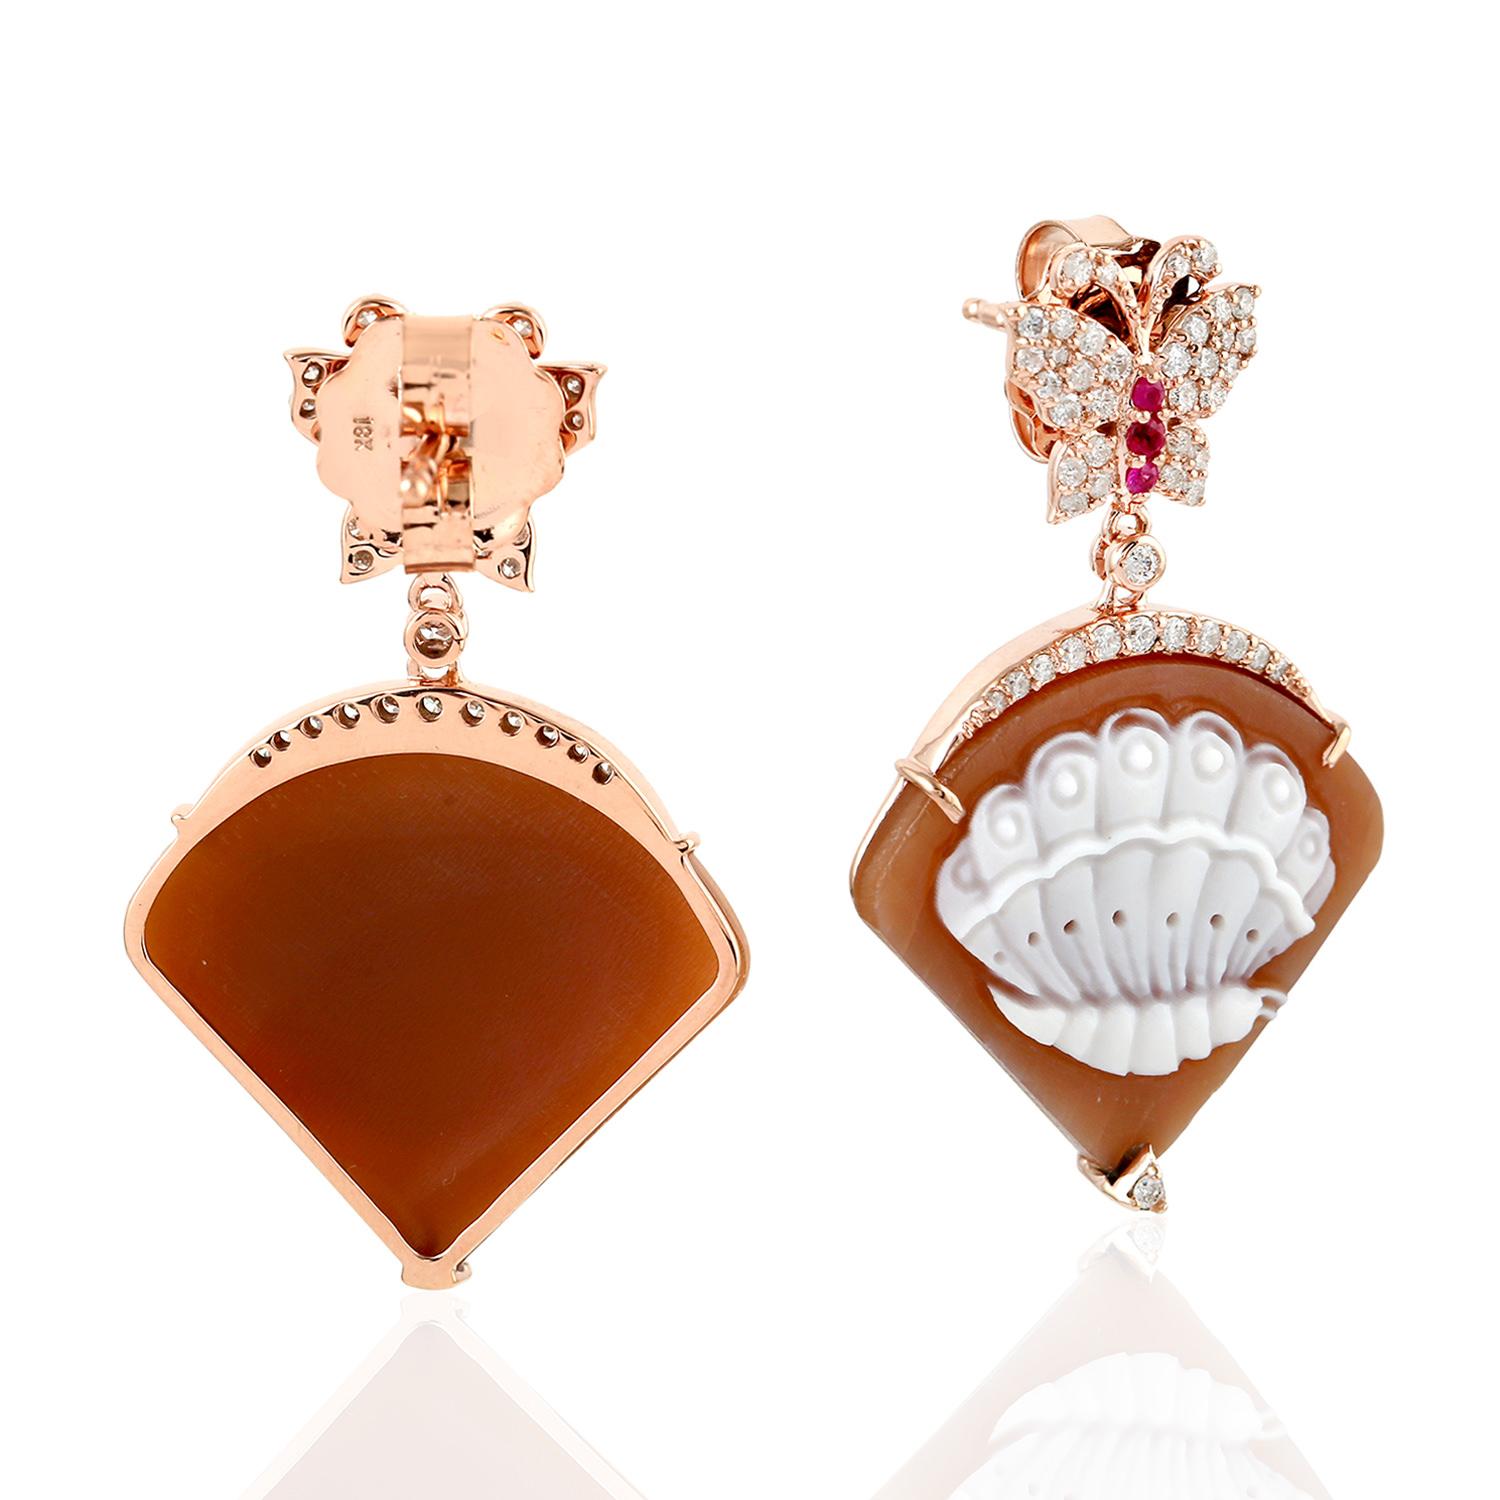 Cast in 18 karat gold. These beautiful cameo earrings are set with 18.25 carat carved cameo, .11 carats ruby and .63 carats of sparkling diamonds. 

FOLLOW  MEGHNA JEWELS storefront to view the latest collection & exclusive pieces.  Meghna Jewels is